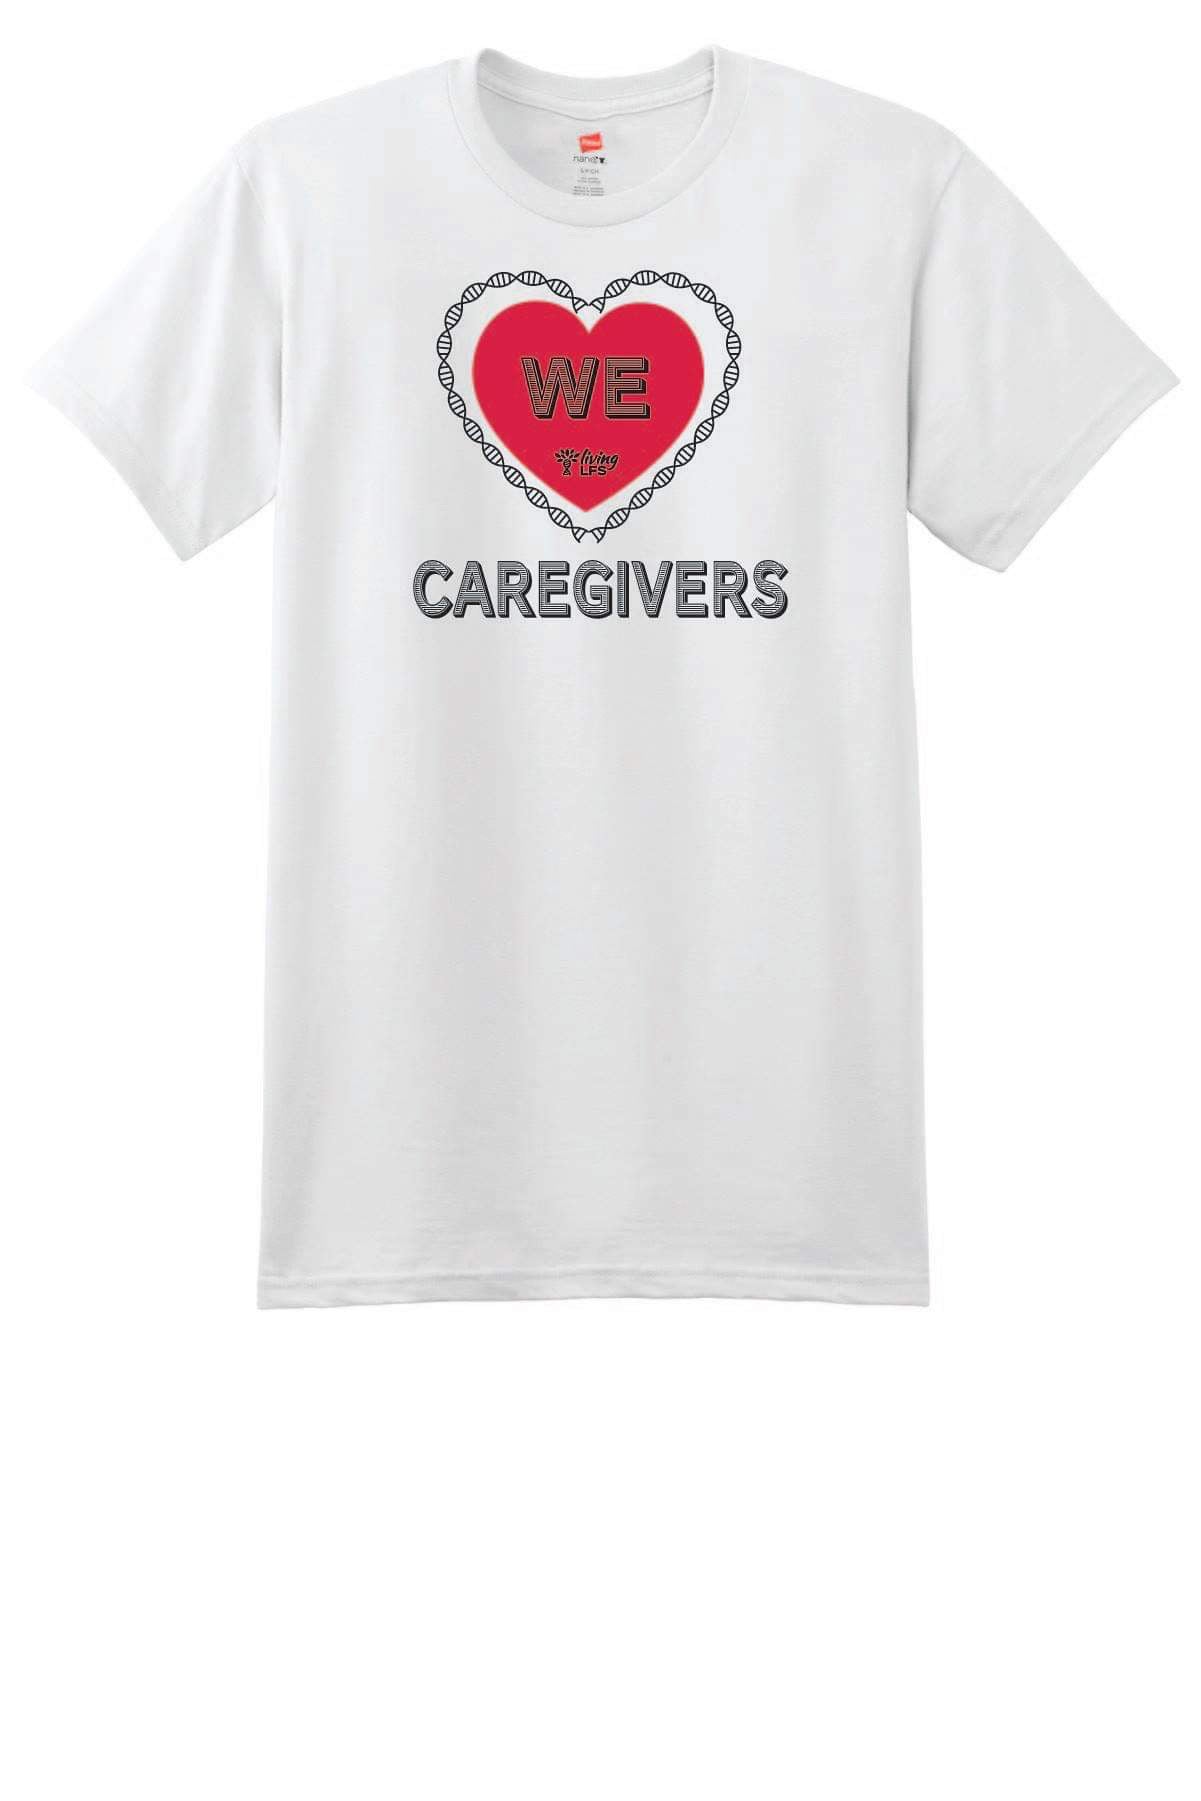 We Love Our Caregivers!